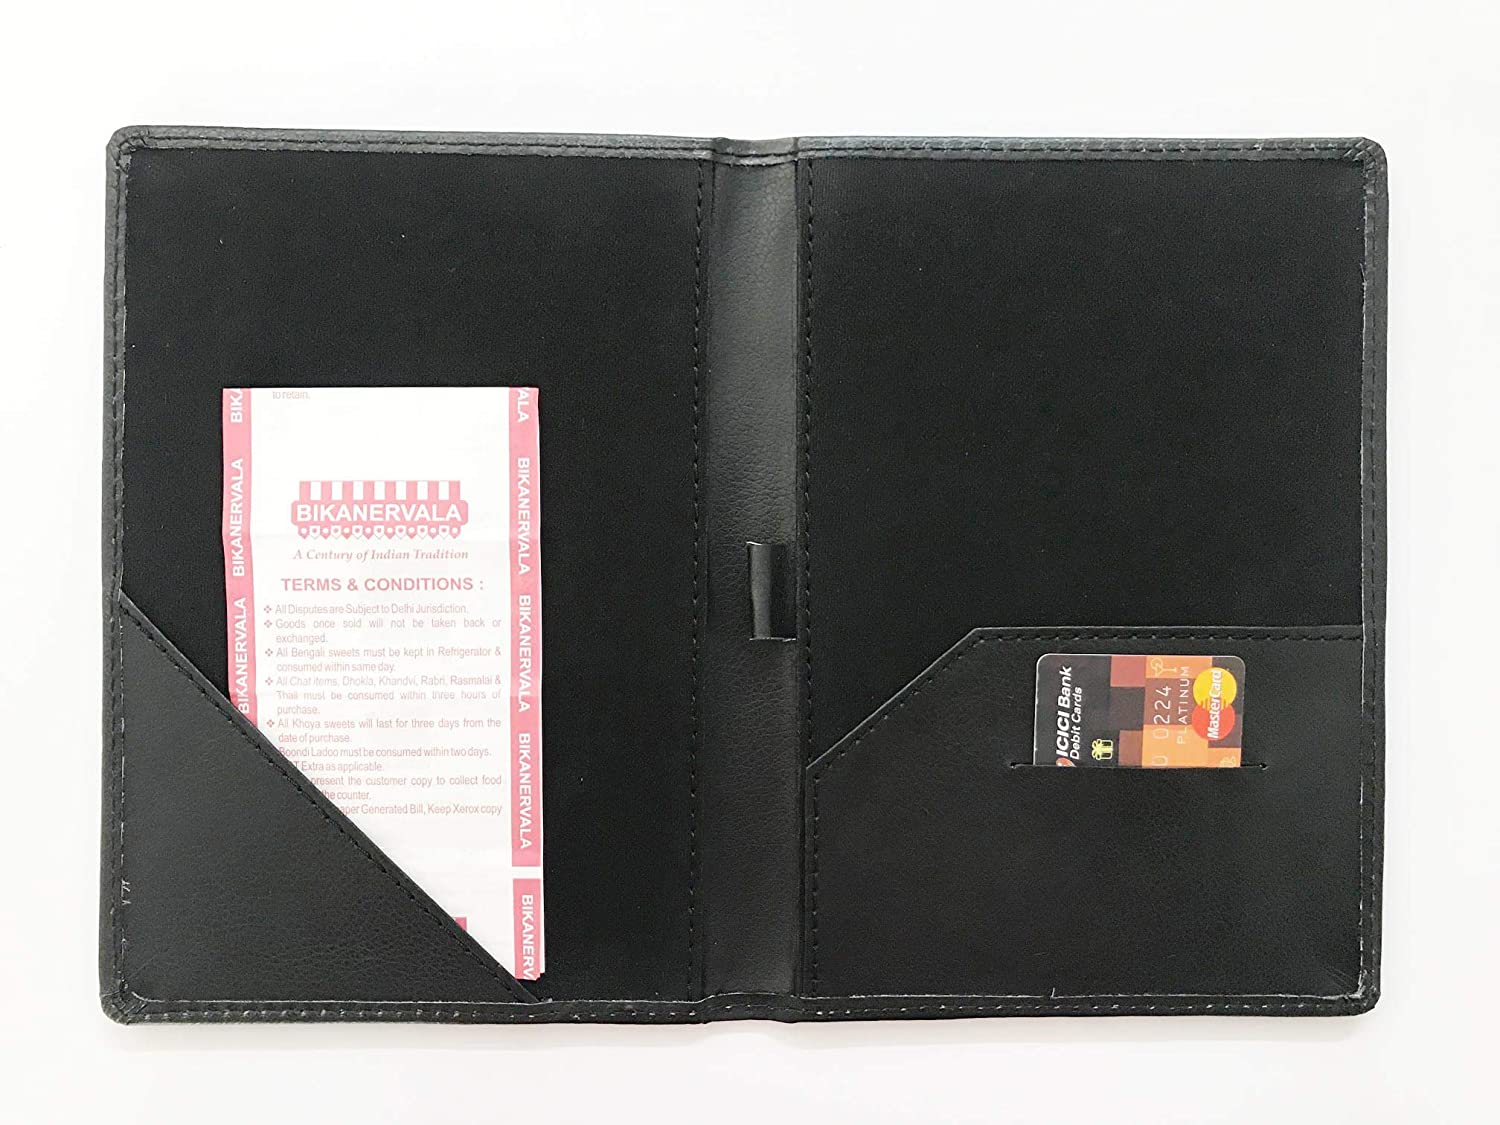 NJ Bill folder for hotel and Restaurant, Guest Check Presenter, Bill folder with Credit Card Pocket and Bill Receipt Pocket for Hotel and Restaurant (9x6 Inches) - BLACK LEATHER